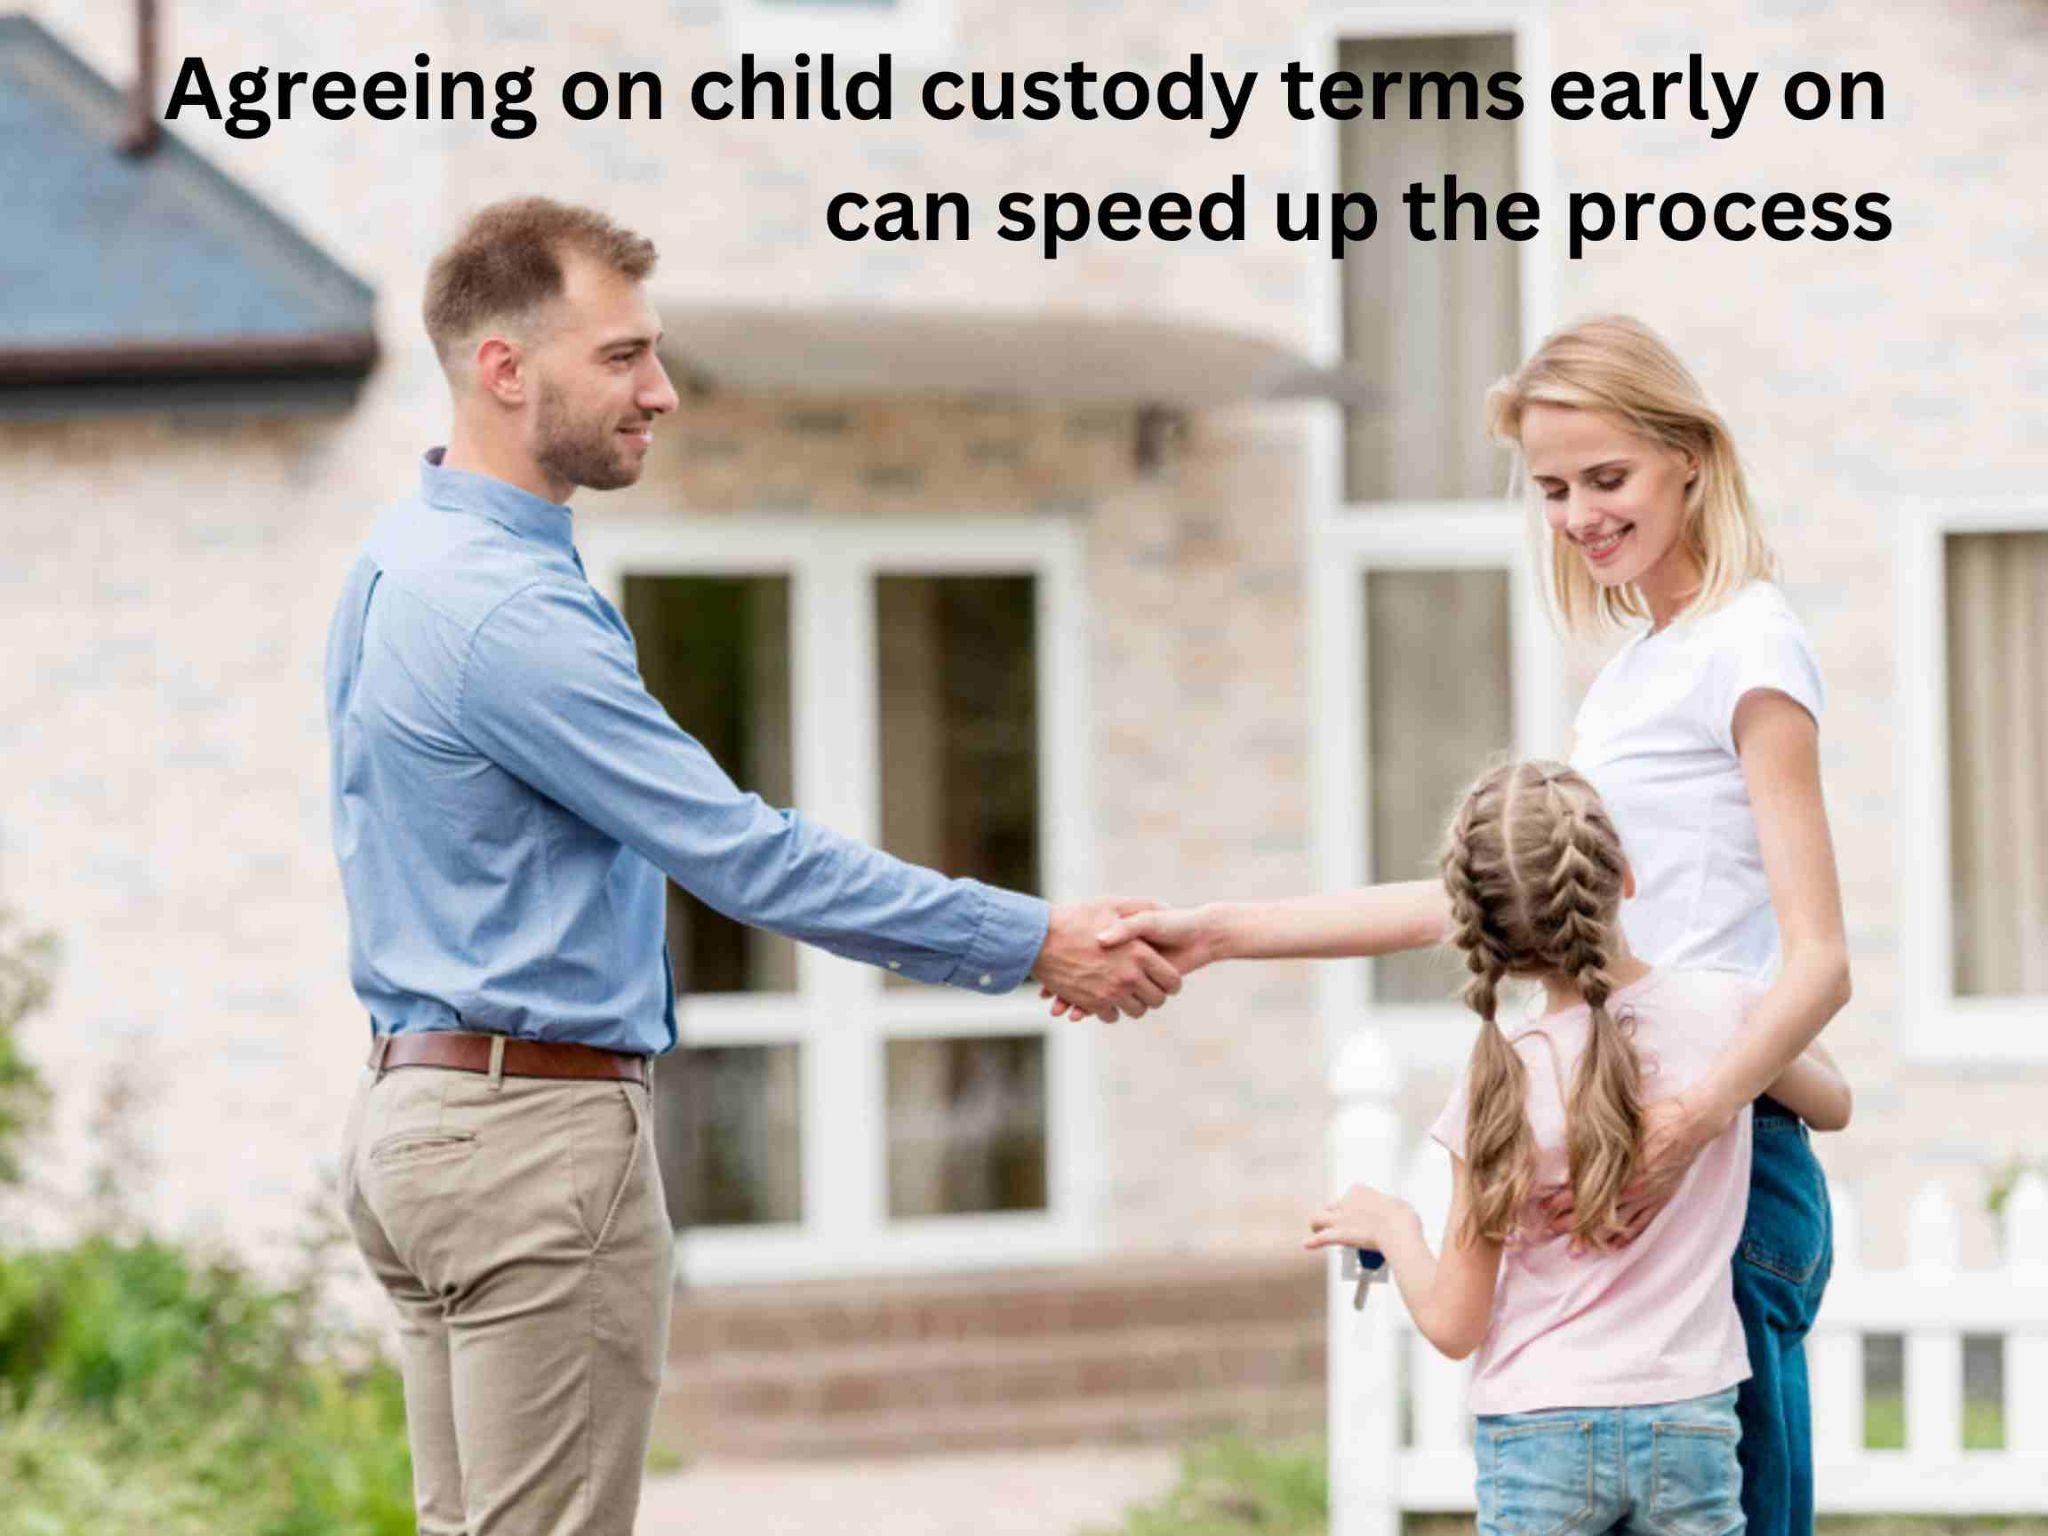 A man and a woman shake hands outside a house while a child holding the woman's hand looks on. Text above them reads, "Agreeing on child custody terms early during an uncontested divorce can speed up the process.